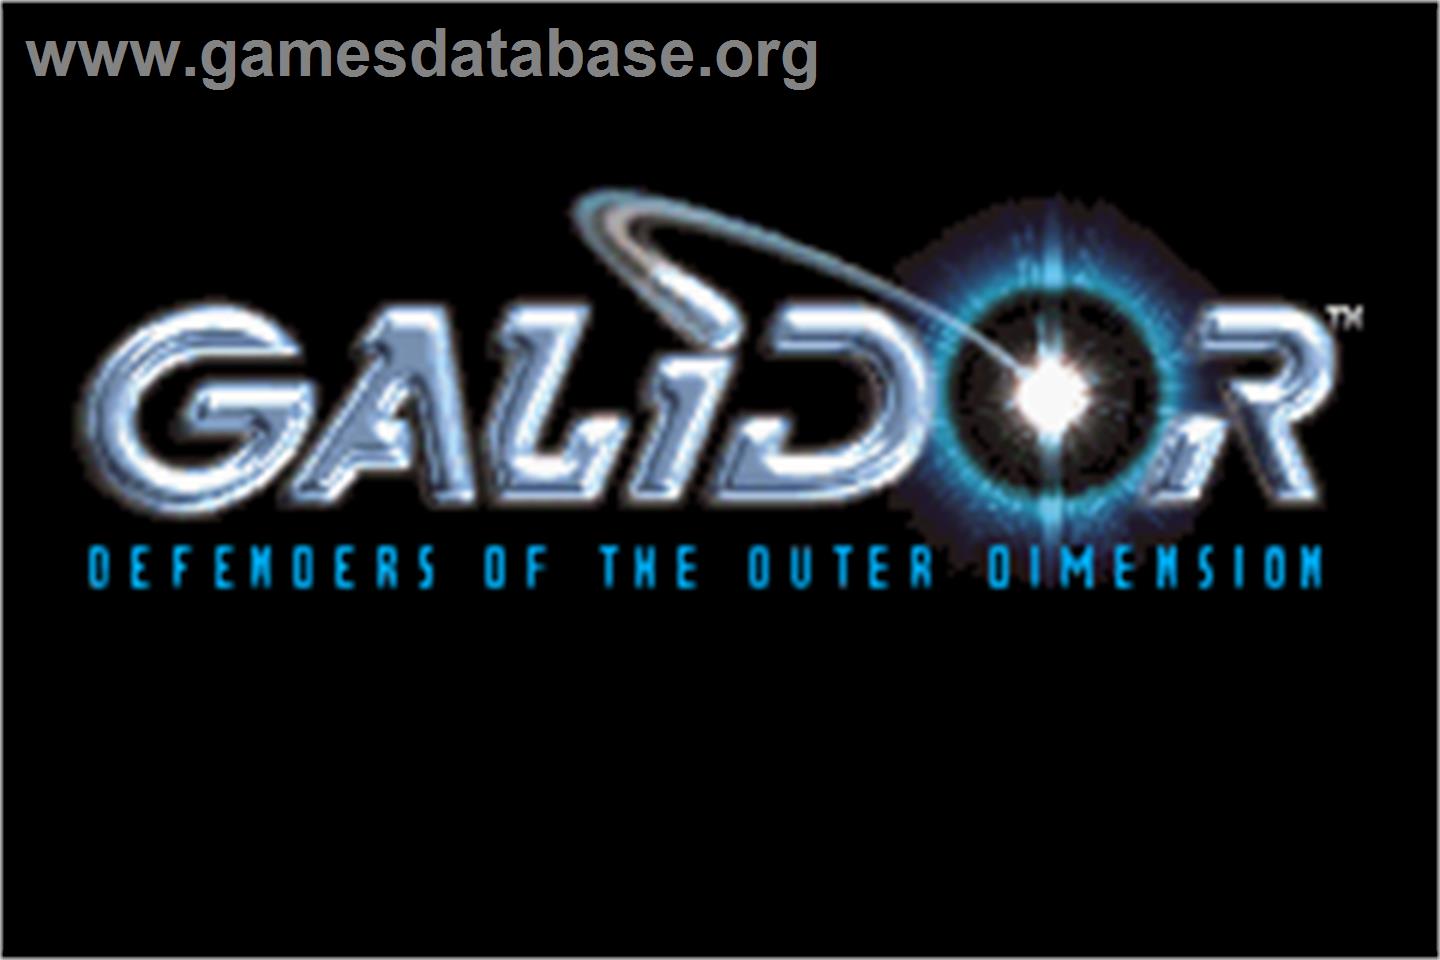 Galidor: Defenders of the Outer Dimension - Nintendo Game Boy Advance - Artwork - Title Screen